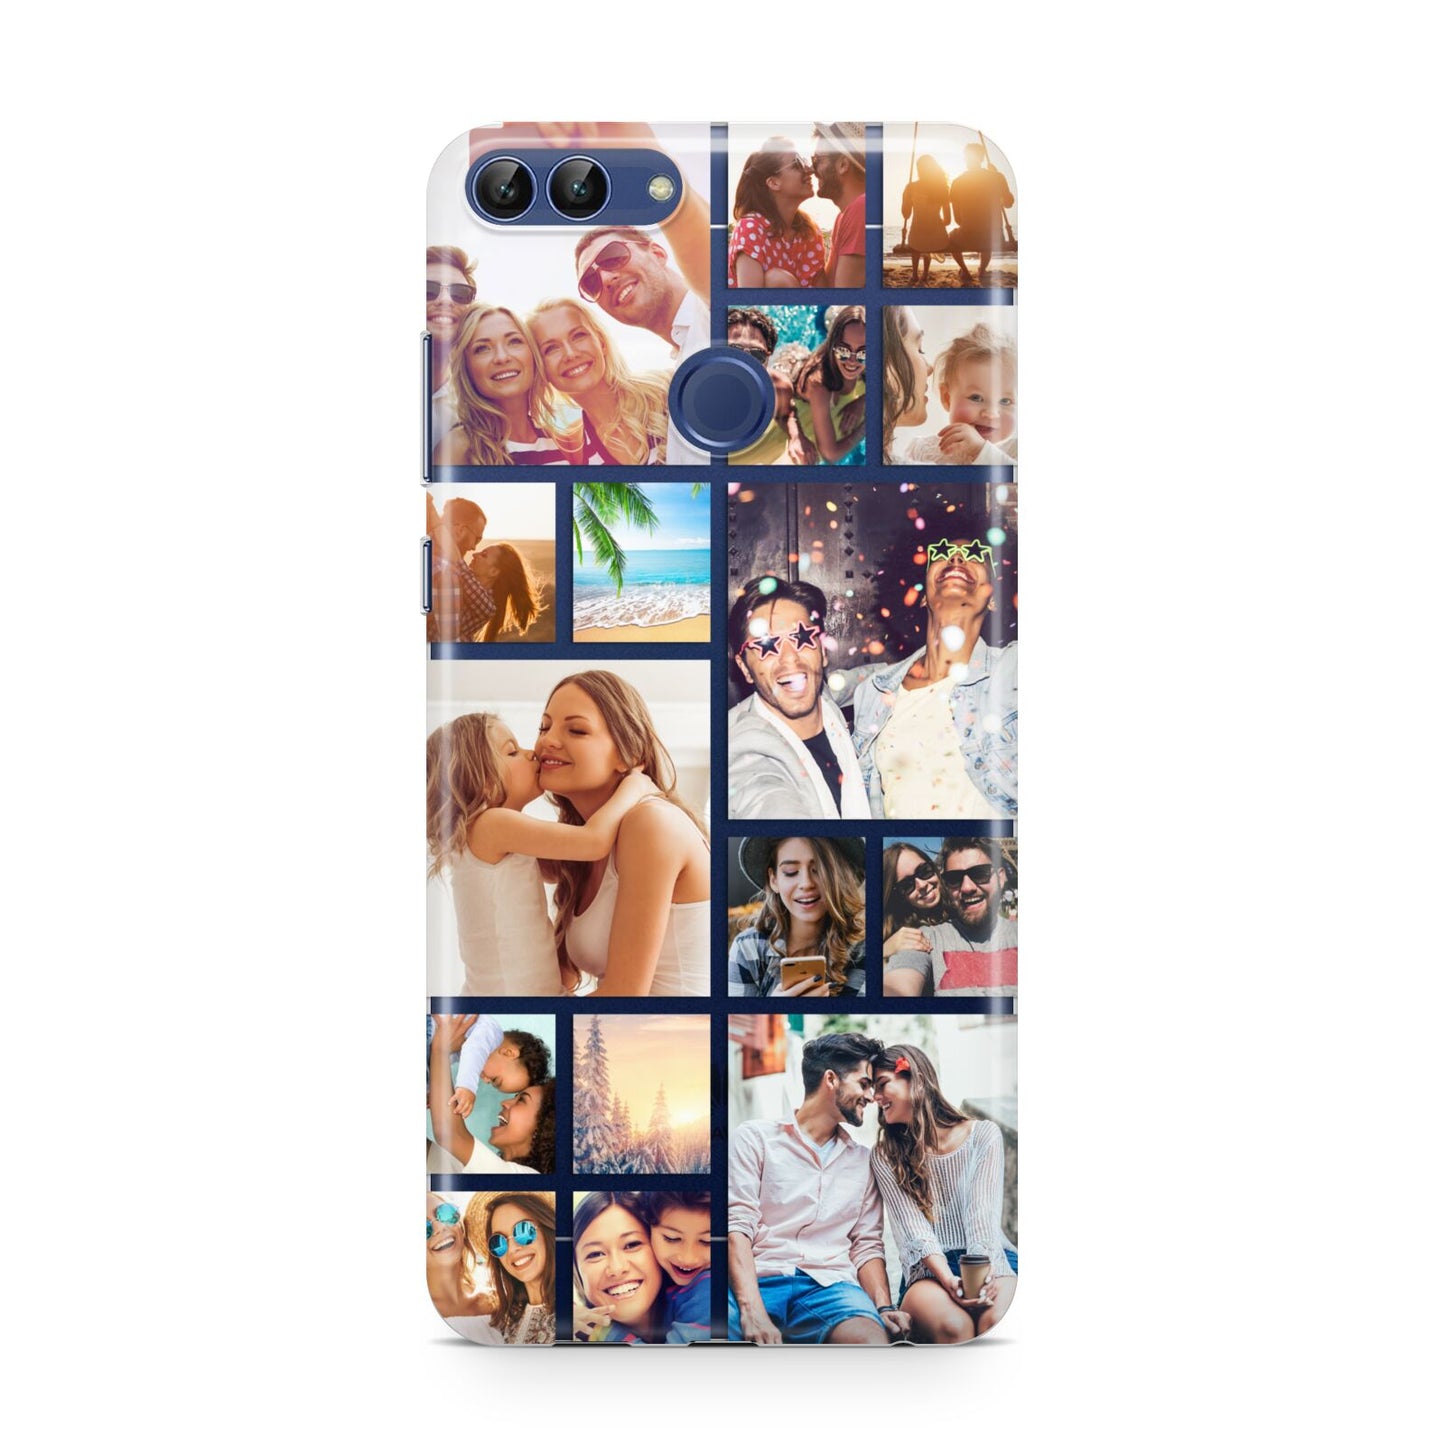 Abstract Multi Tile Photo Montage Upload Huawei P Smart Case